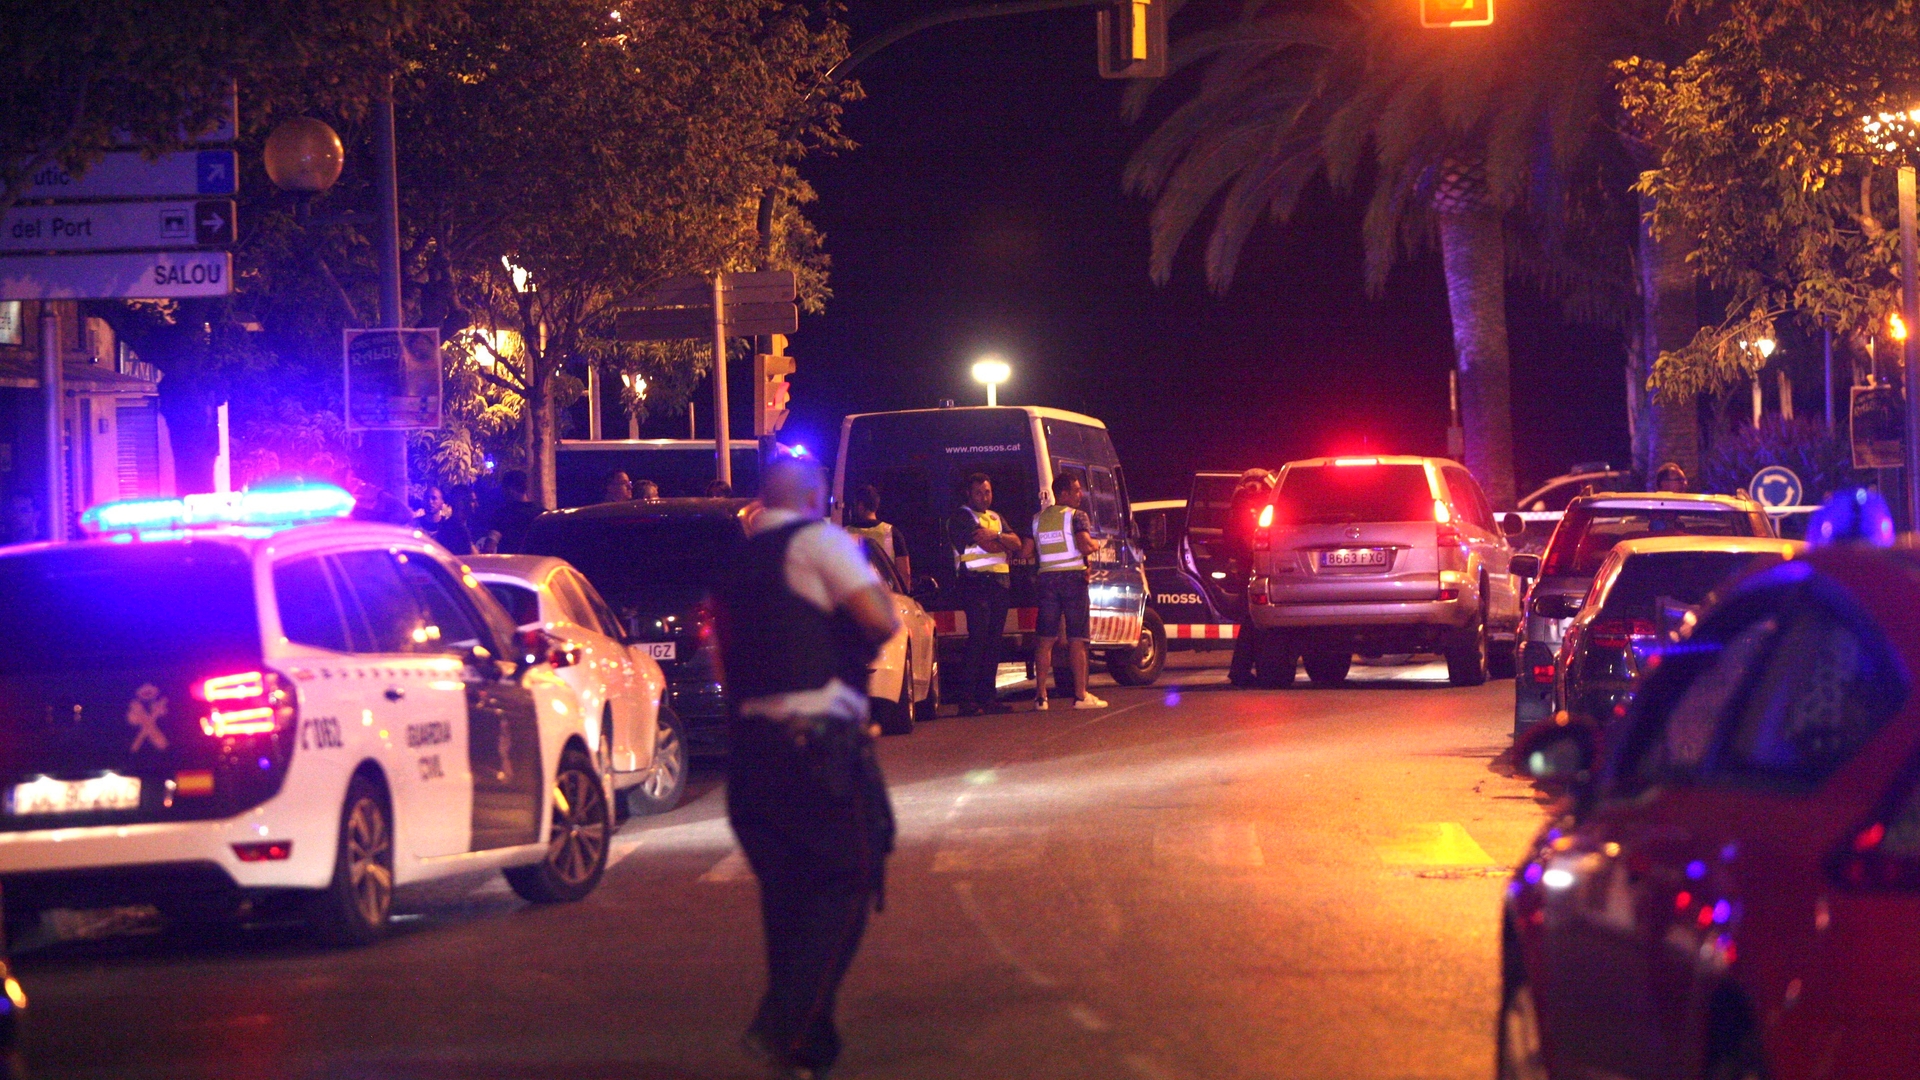 SPAIN CAMBRILS VEHICLE ATTACK